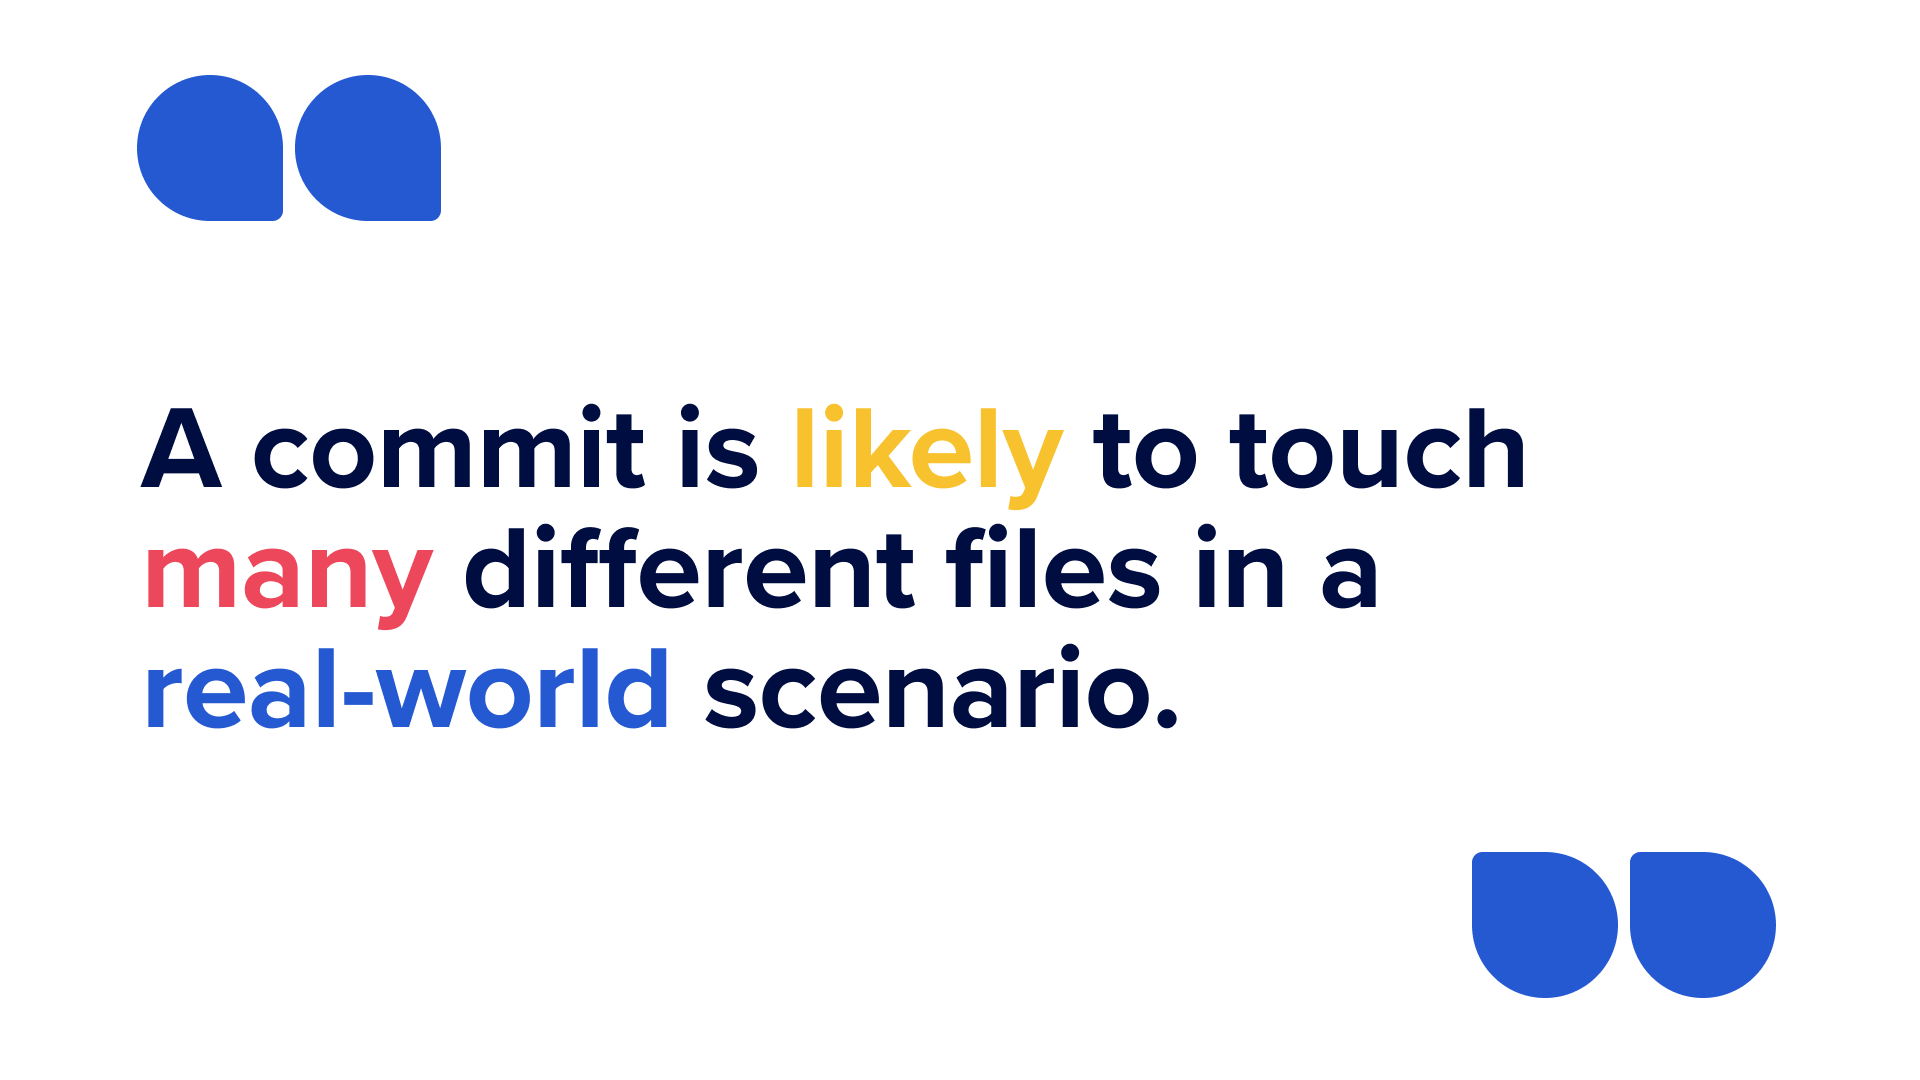 A commit is likely to touch many different files in a real-world scenario kosli quote